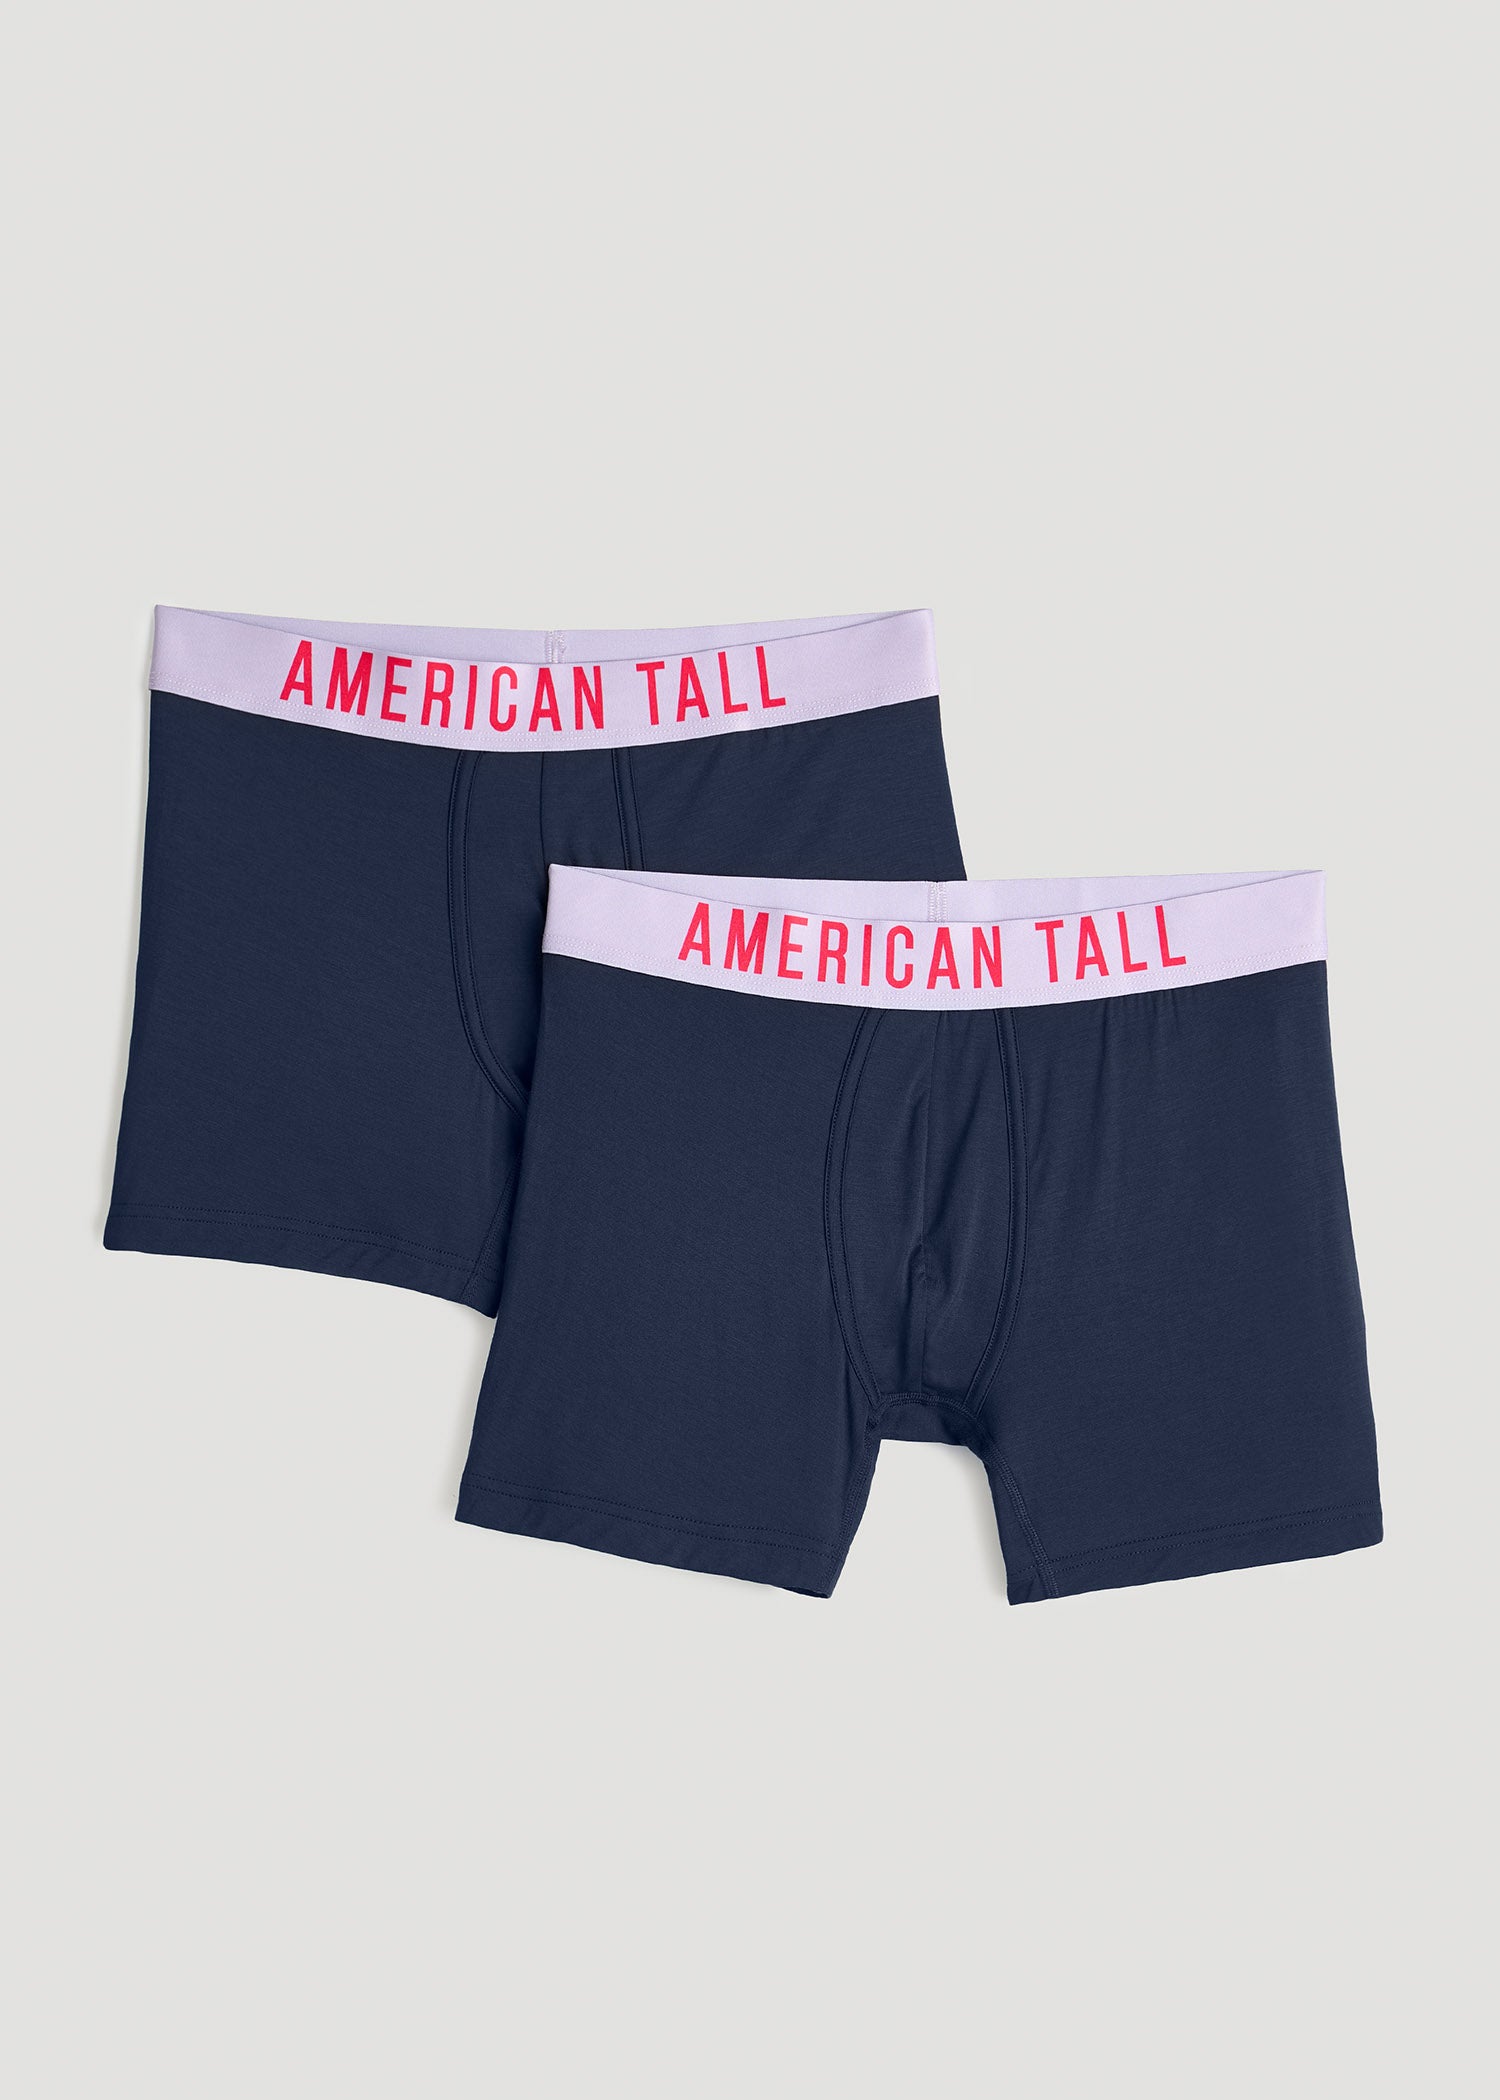 Micro Modal Extra-Long Boxer Briefs in Navy (2-Pack)